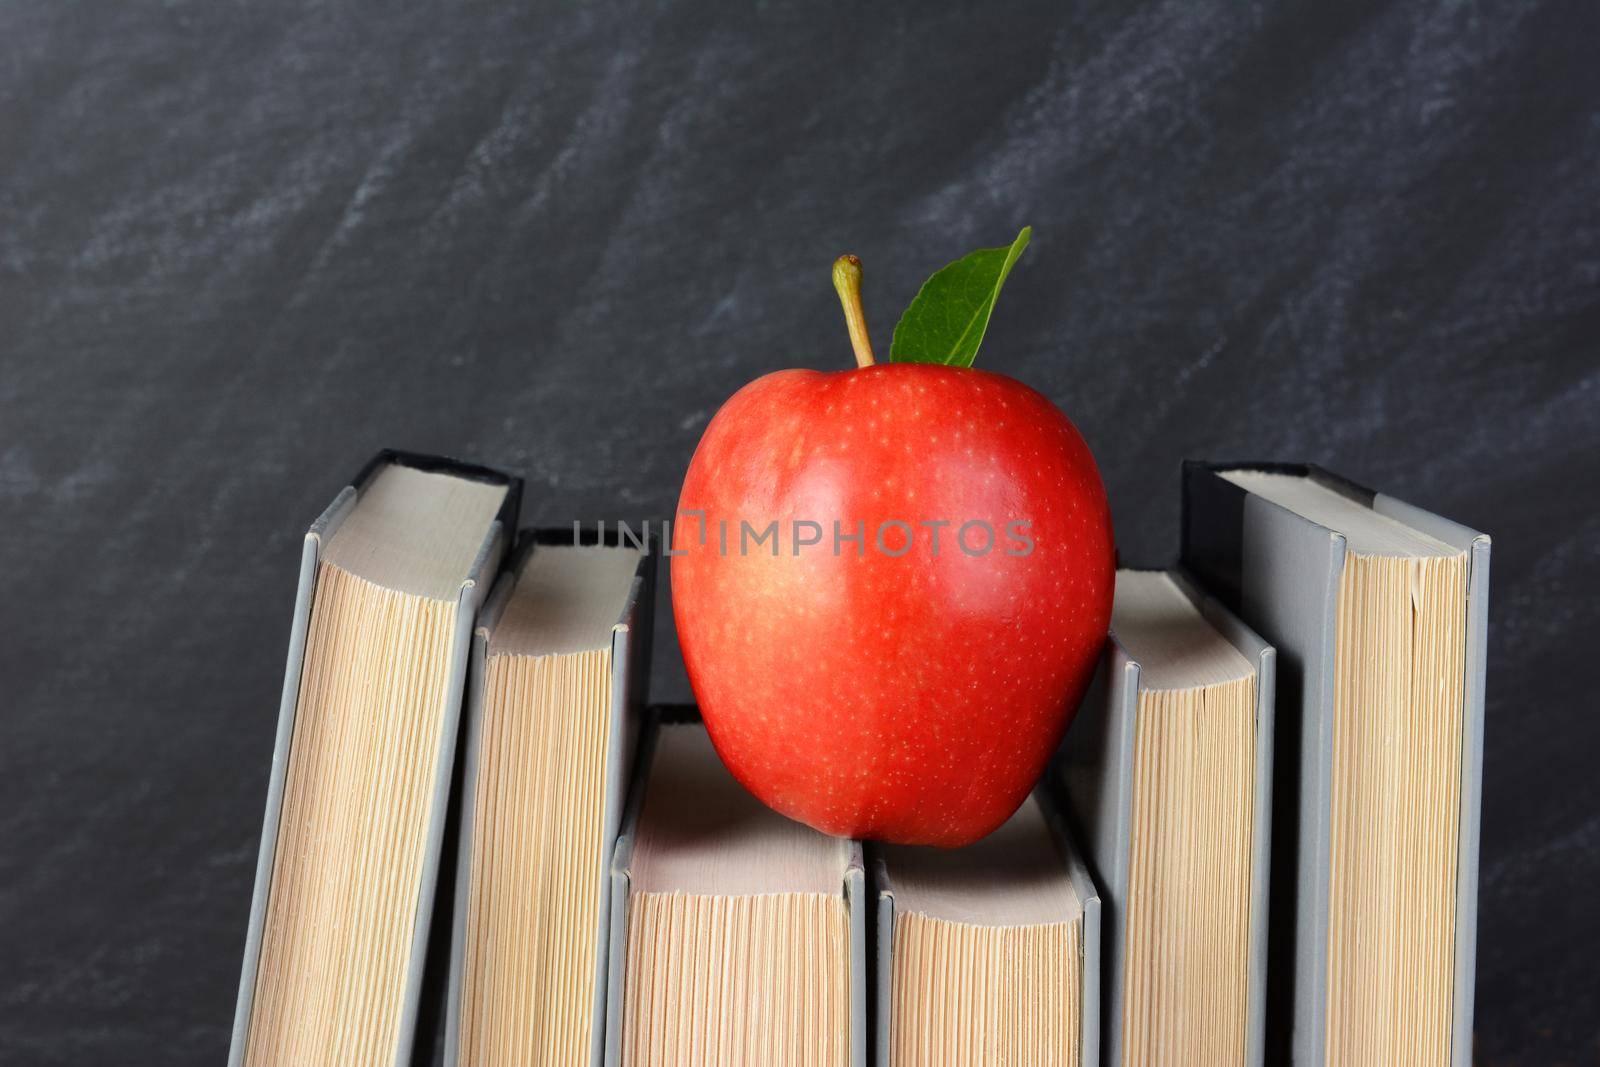 Red Apple on Books by sCukrov